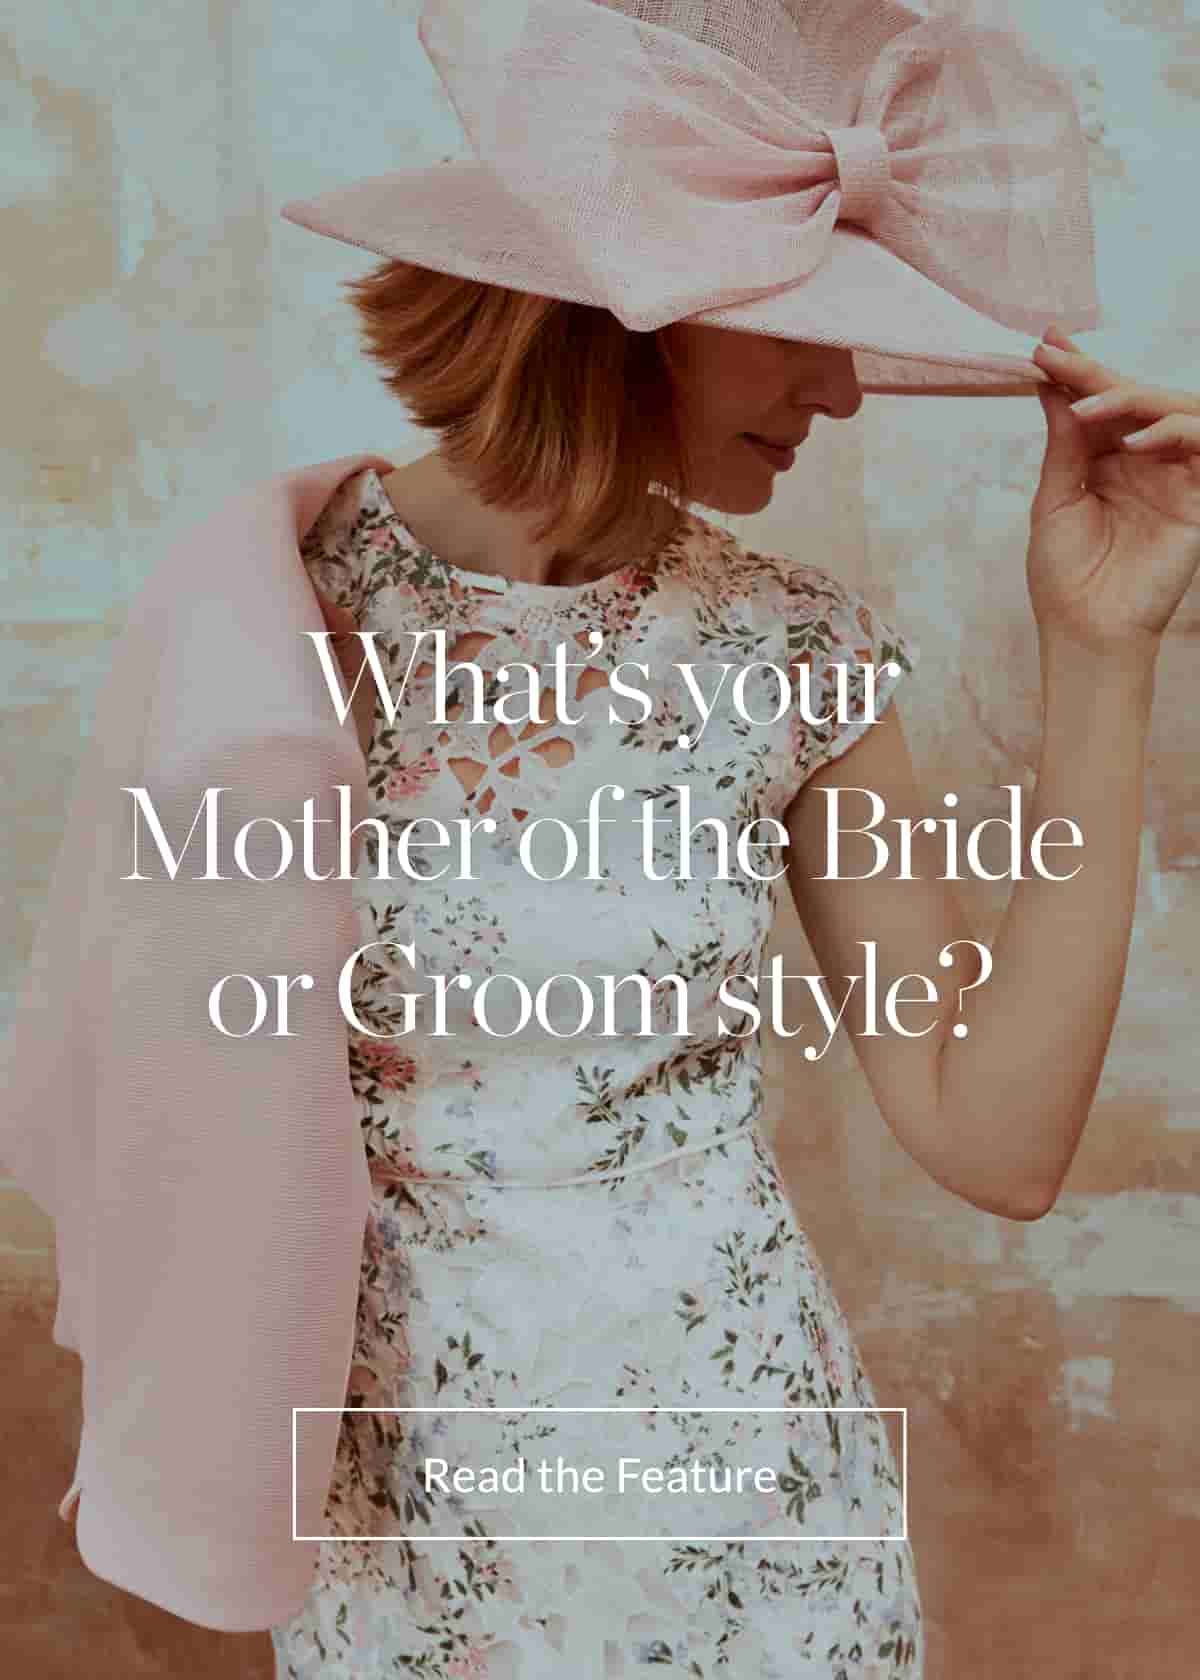 Mother of the bride feature